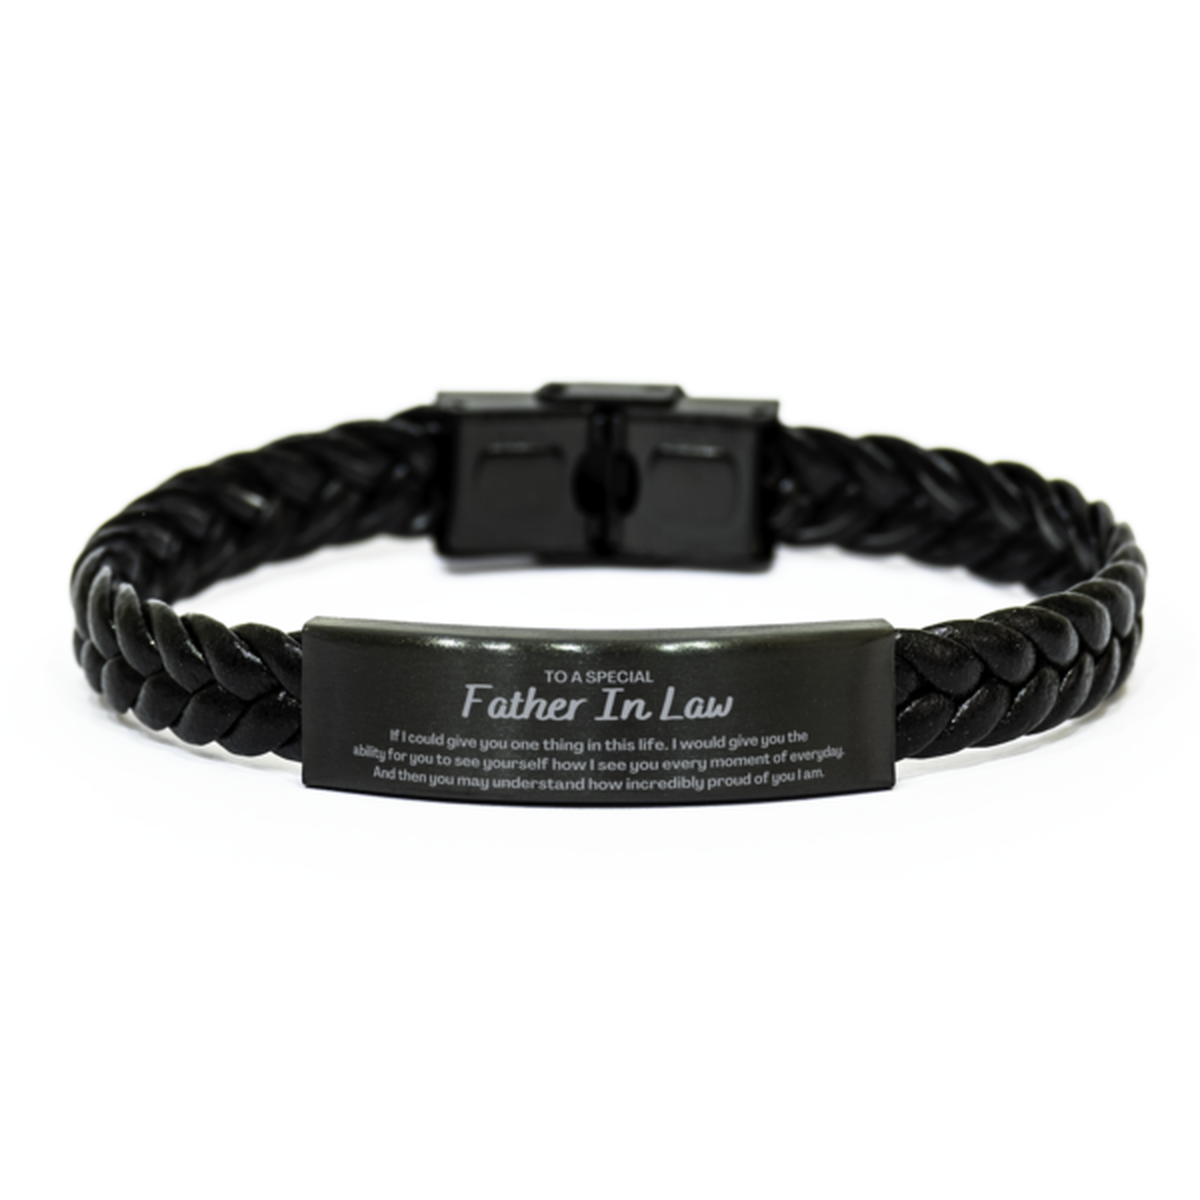 To My Father In Law Braided Leather Bracelet, Gifts For Father In Law Engraved, Inspirational Gifts for Christmas Birthday, Epic Gifts for Father In Law To A Special Father In Law how incredibly proud of you I am